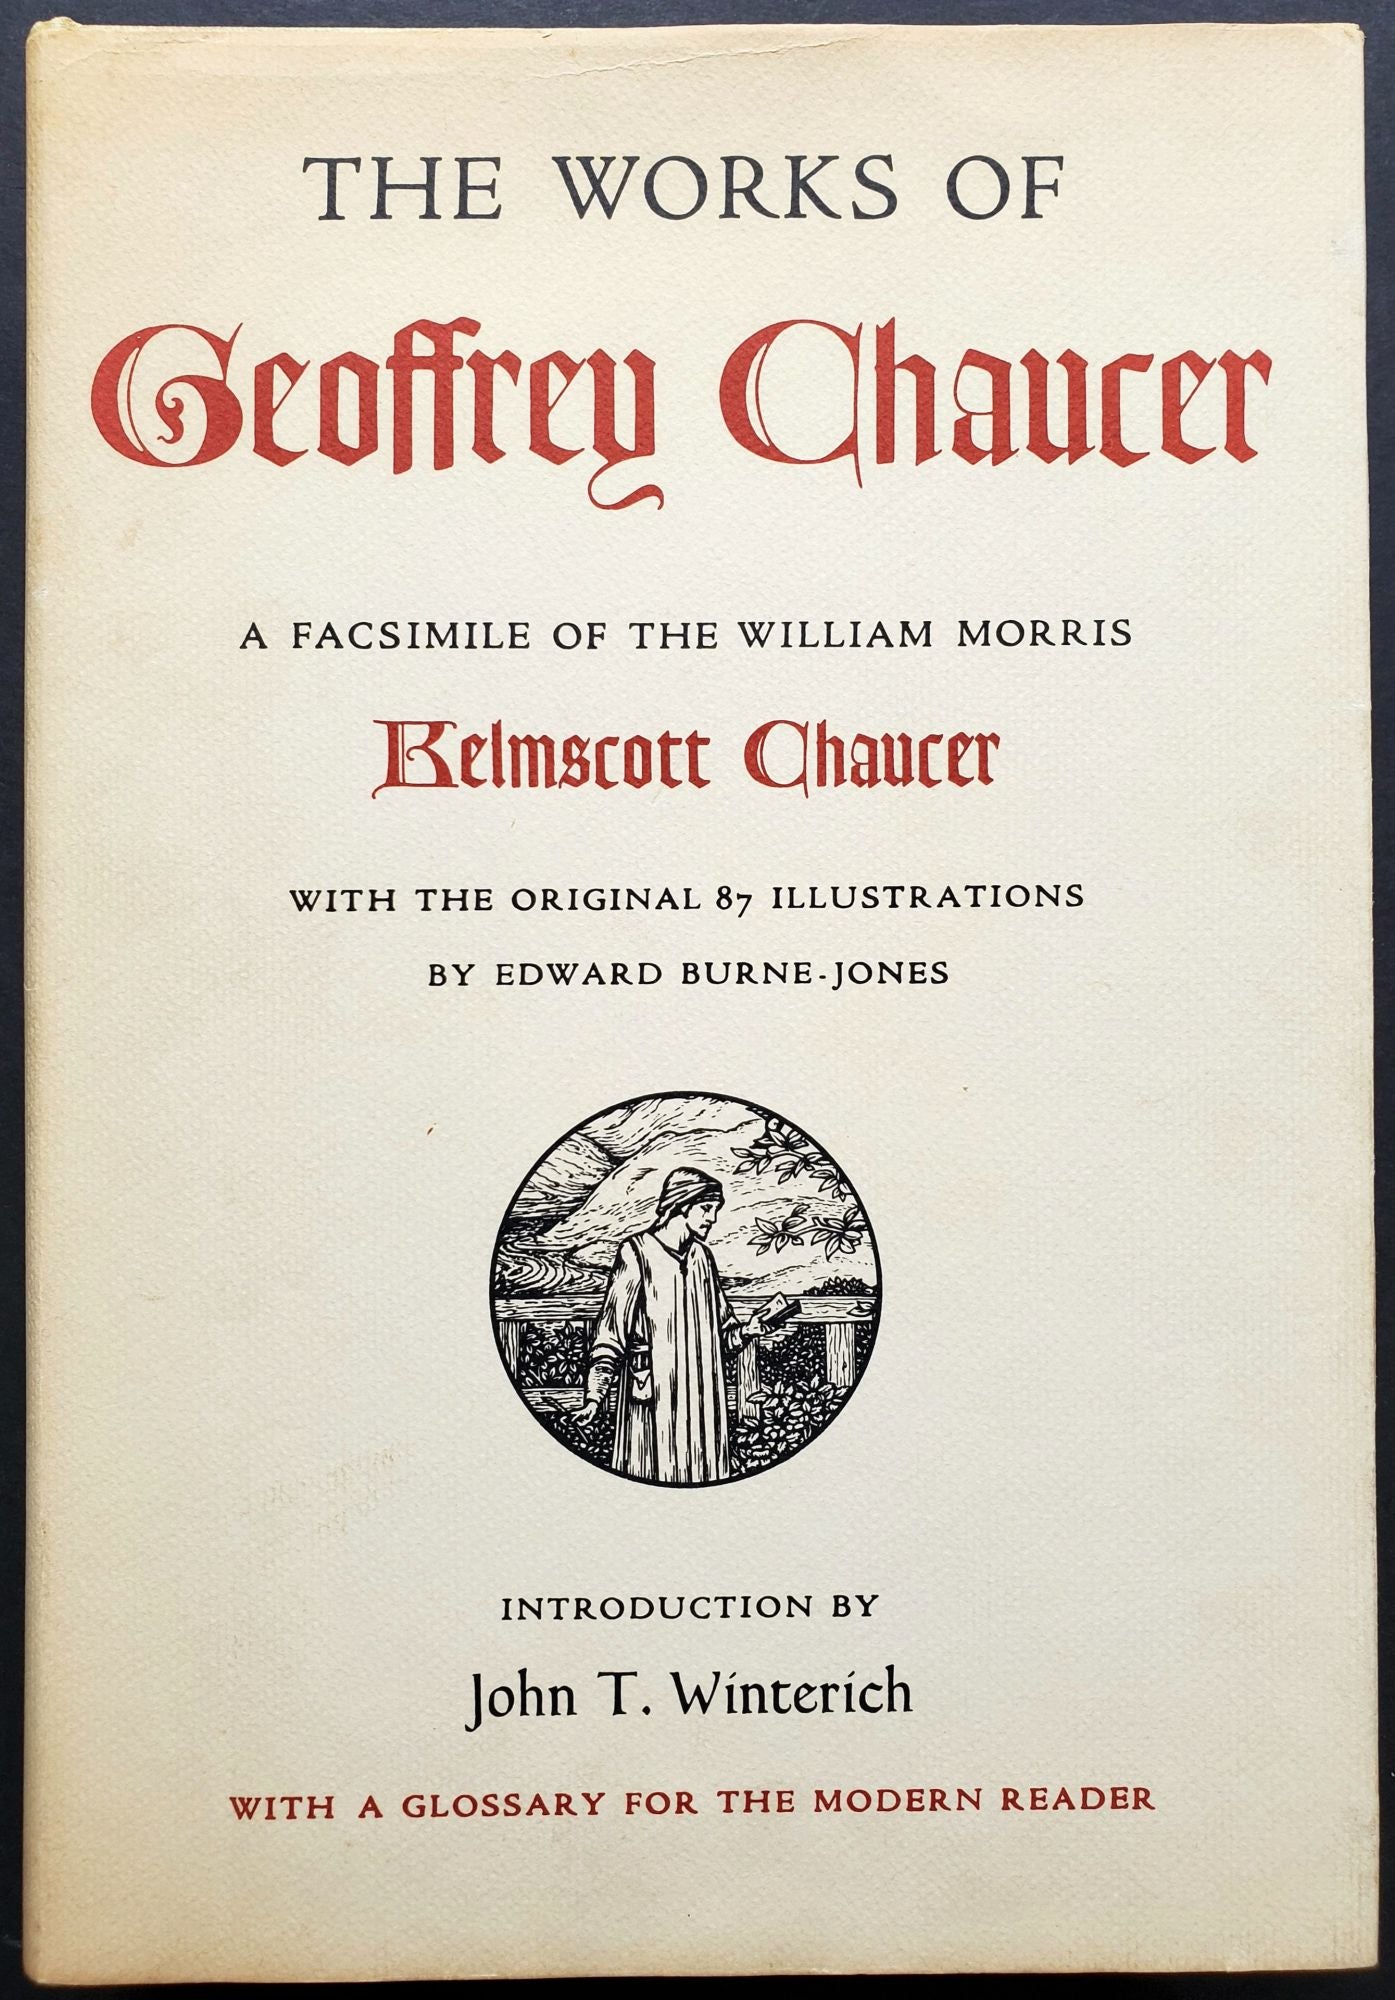 The Works of Geoffrey Chaucer; A Fascimile of the William Morris Kelmscott  Chaucer by Edward Burne-Jones, William Morris on Star of the Sea Books